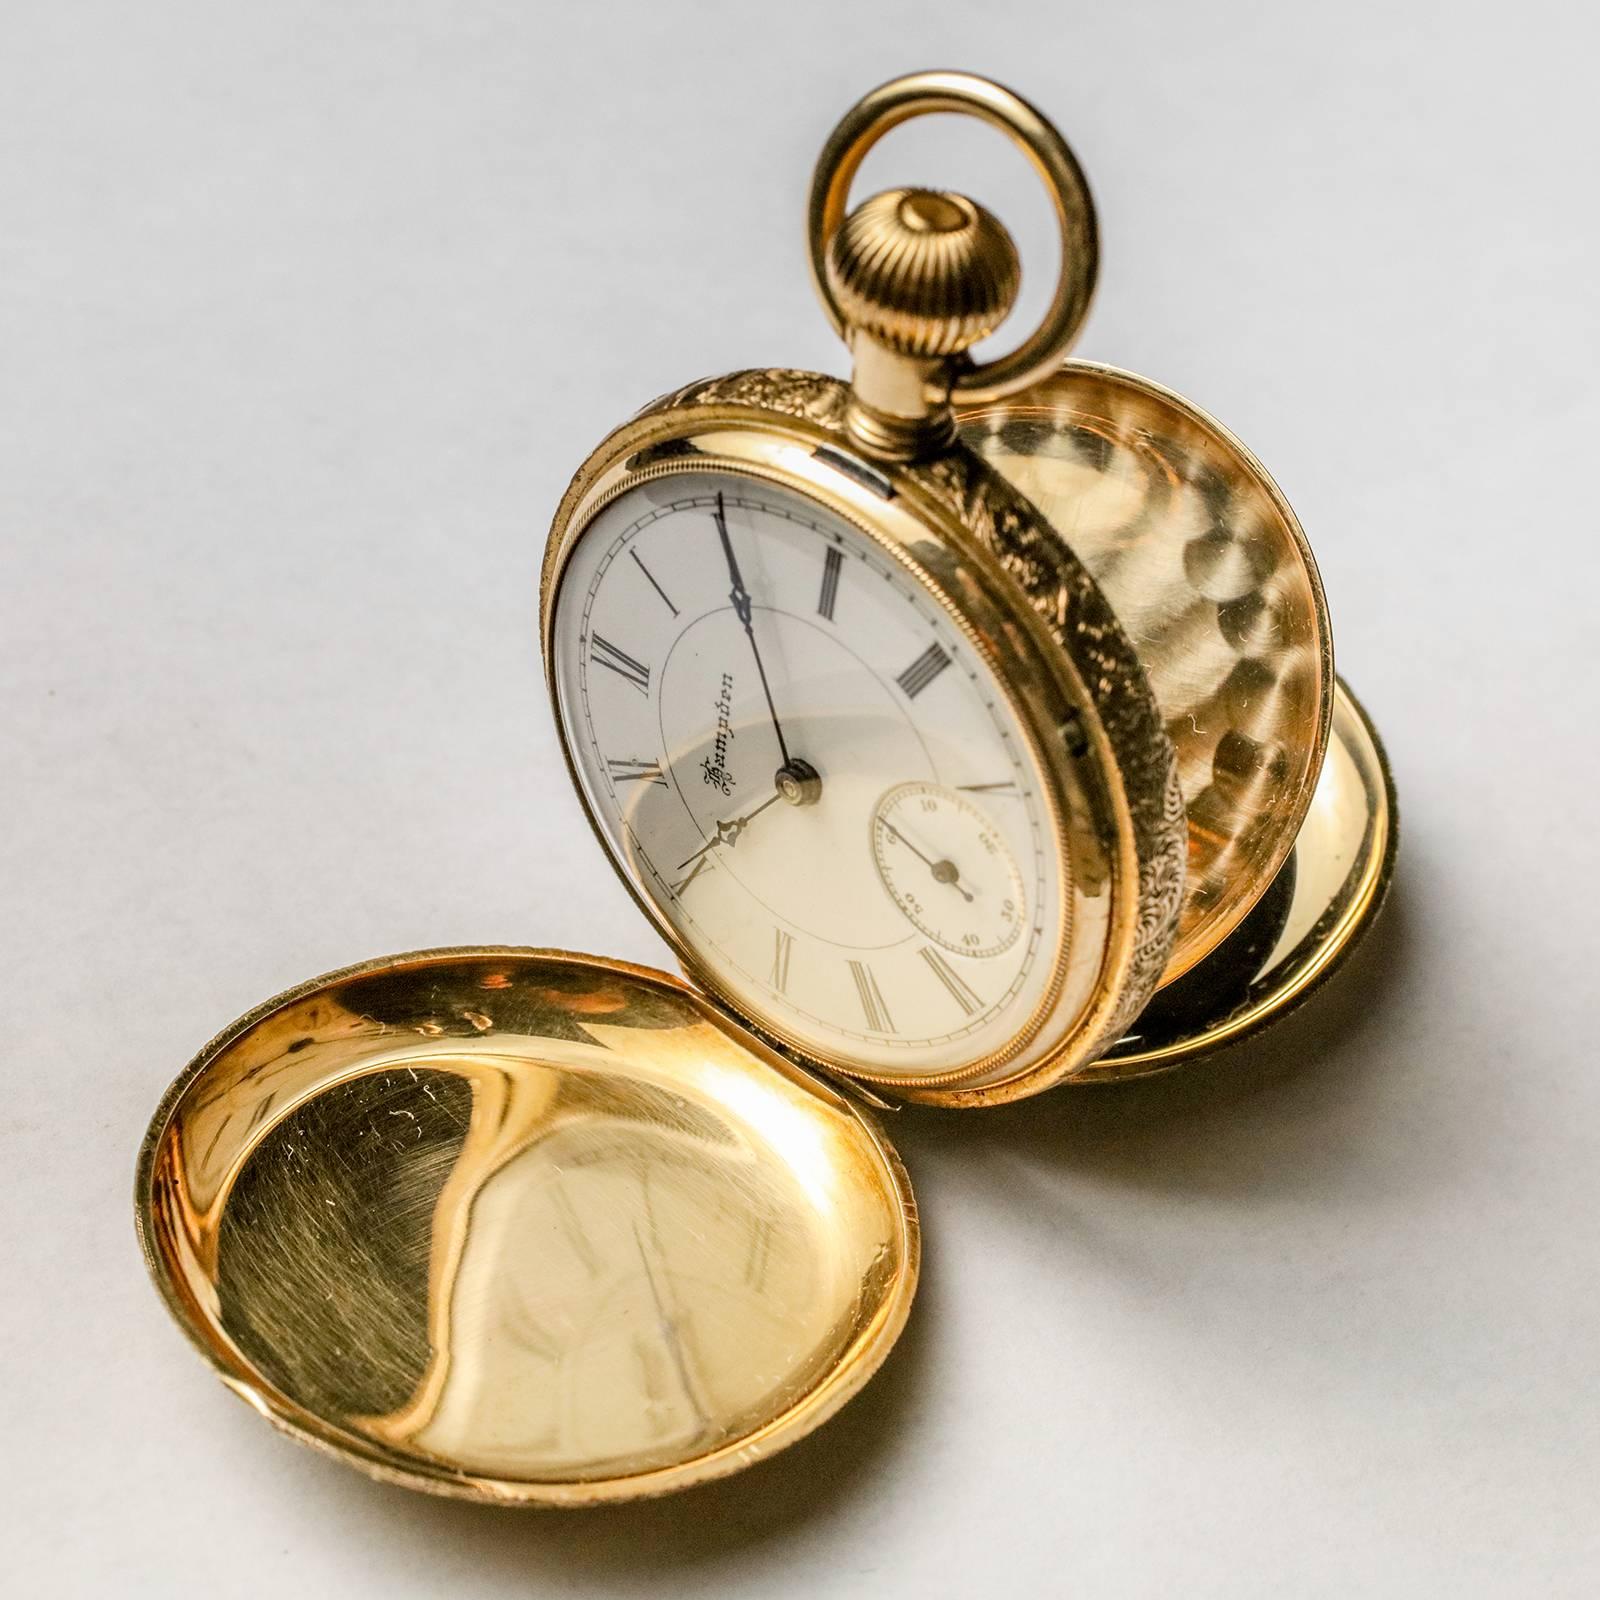 Large gold filled antique pocket watch by HAMPDEN Watch Co.  Case features multi-colored gold overlay with beautifully detailed flowers on both sides.  Large medallion on front can be engraved.  Unusual lever pulls out for setting time (vs. stem